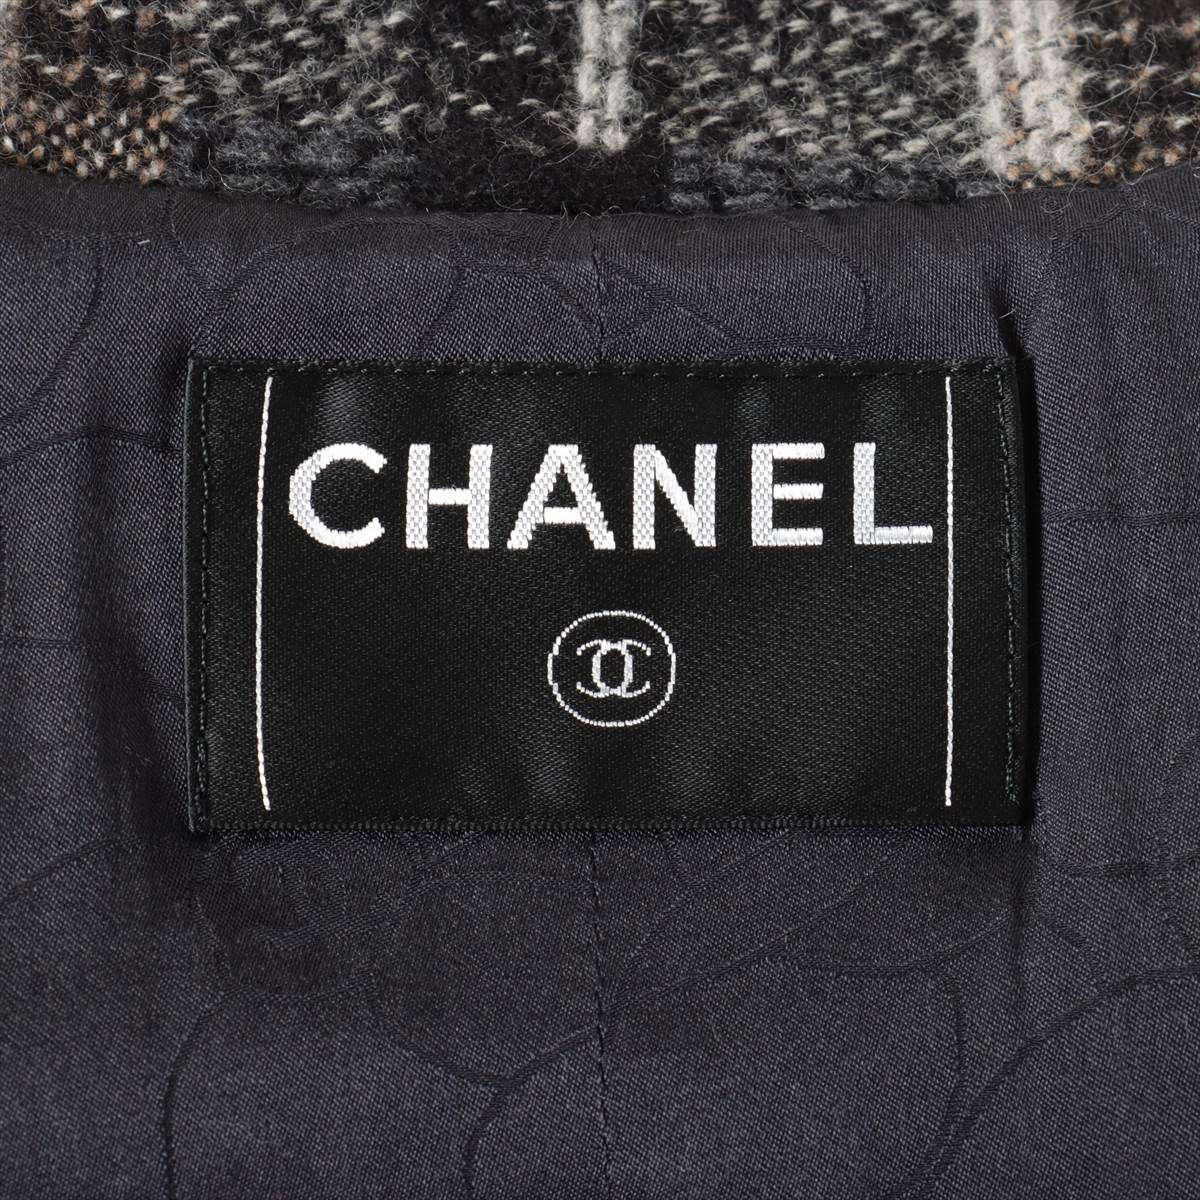 Chanel Coco Button Unknown material Jacket Unknown size Ladies' Multicolor No sign tag